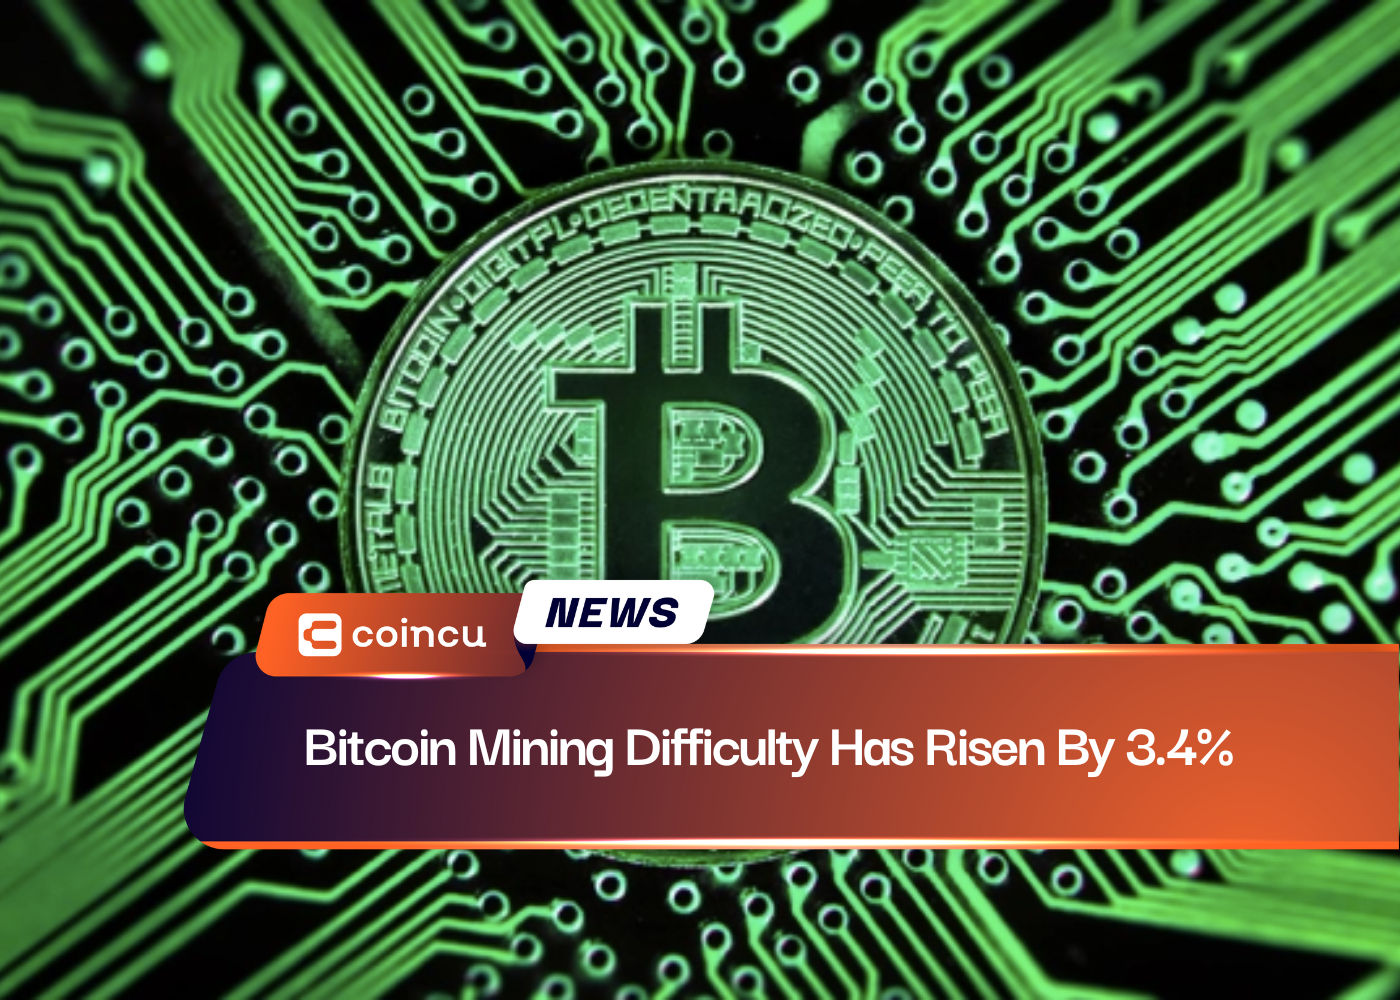 Bitcoin Mining Difficulty Has Risen By 3.4%